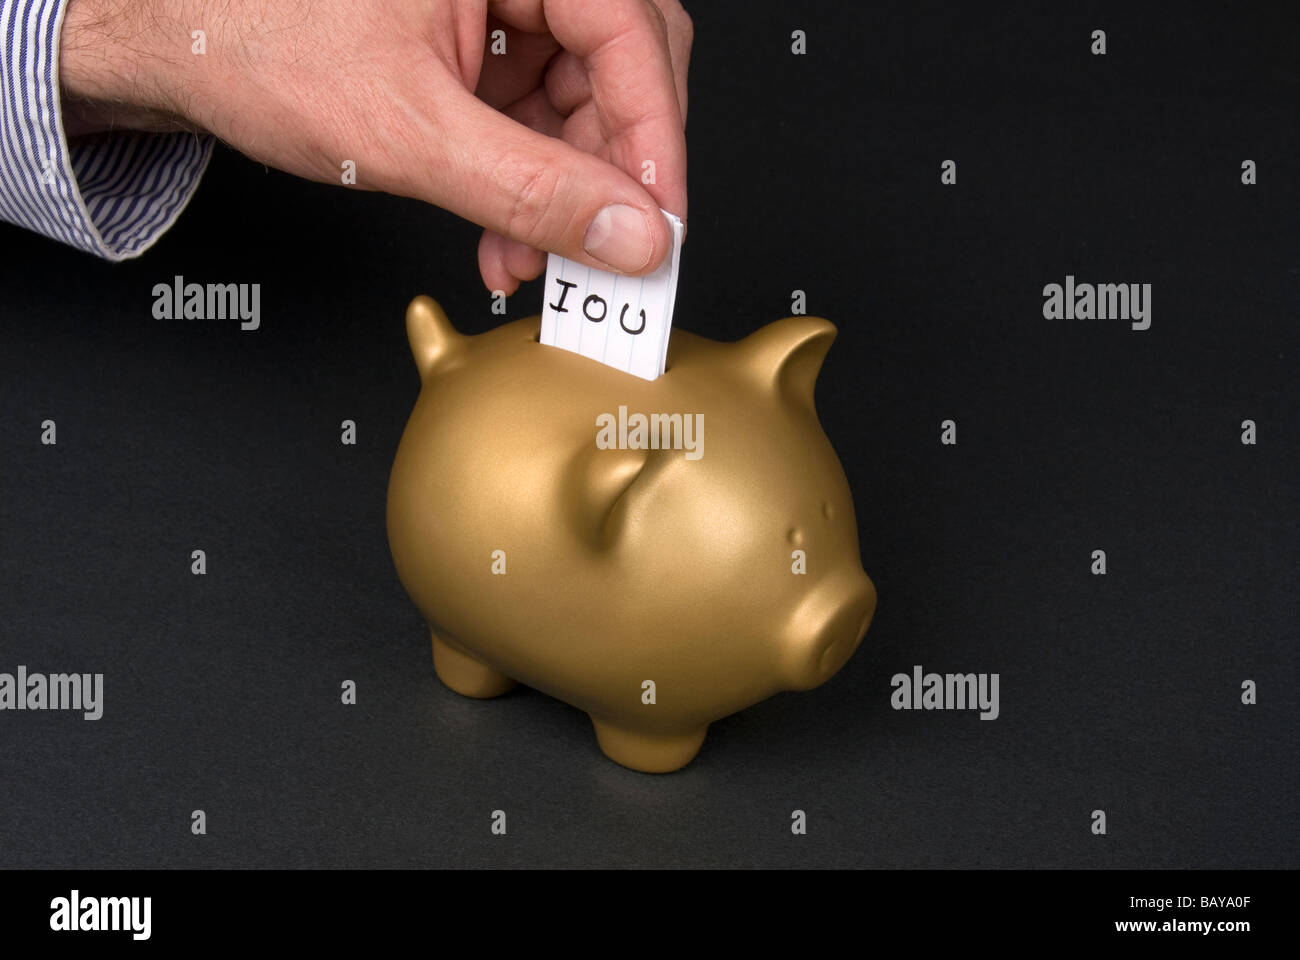 A man places a slip of paper into a piggy bank Stock Photo